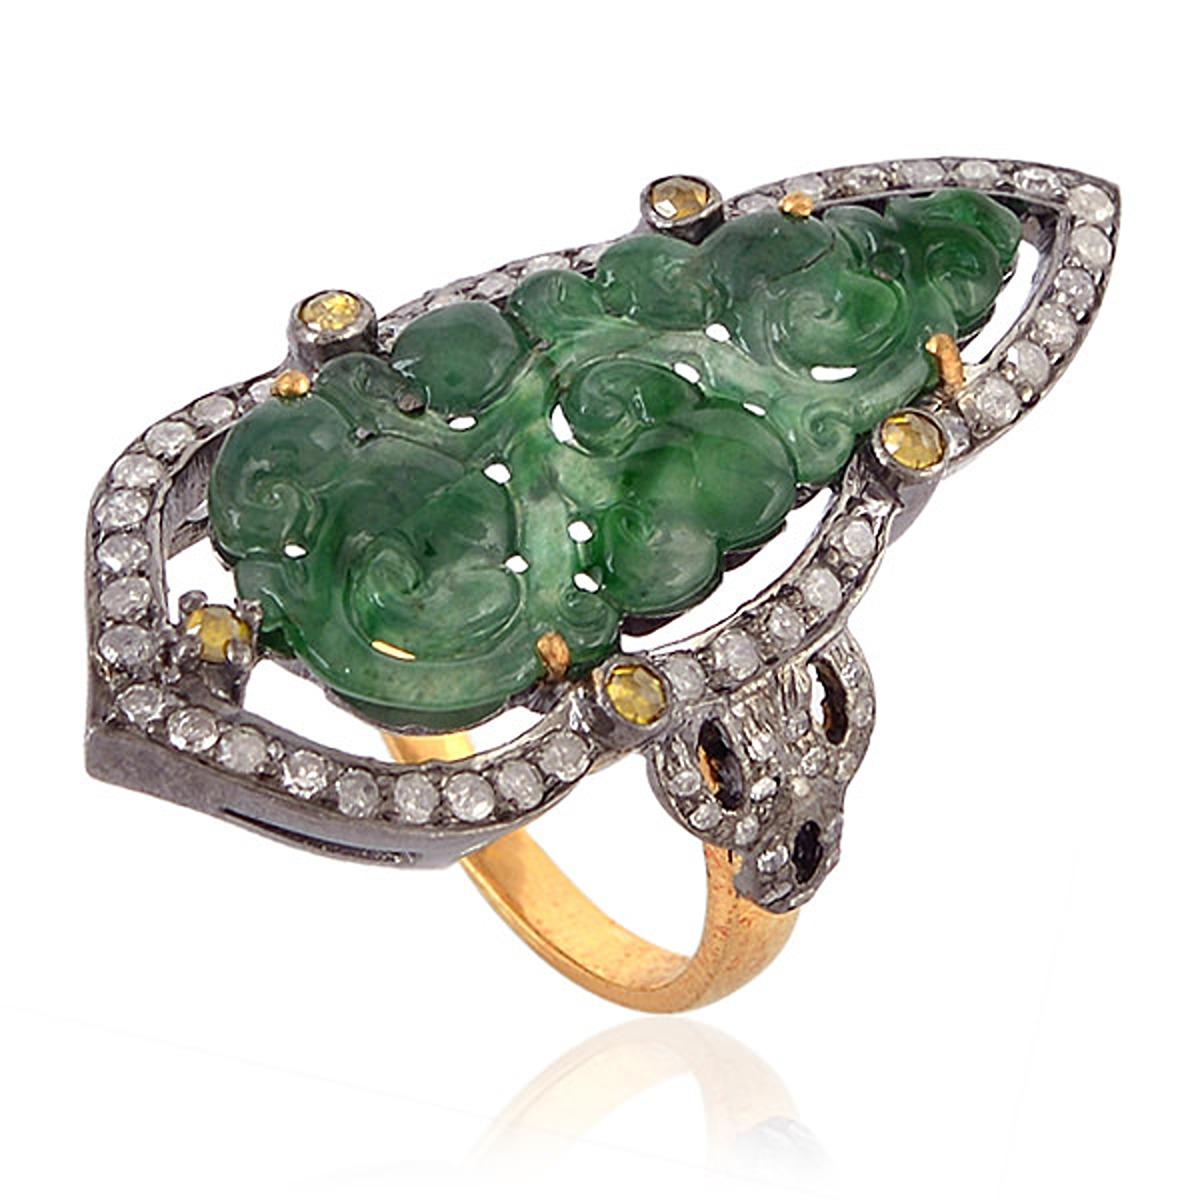 Carved Jade Cocktail Ring With Diamonds Made In 18k Yellow Gold & Silver In New Condition For Sale In New York, NY